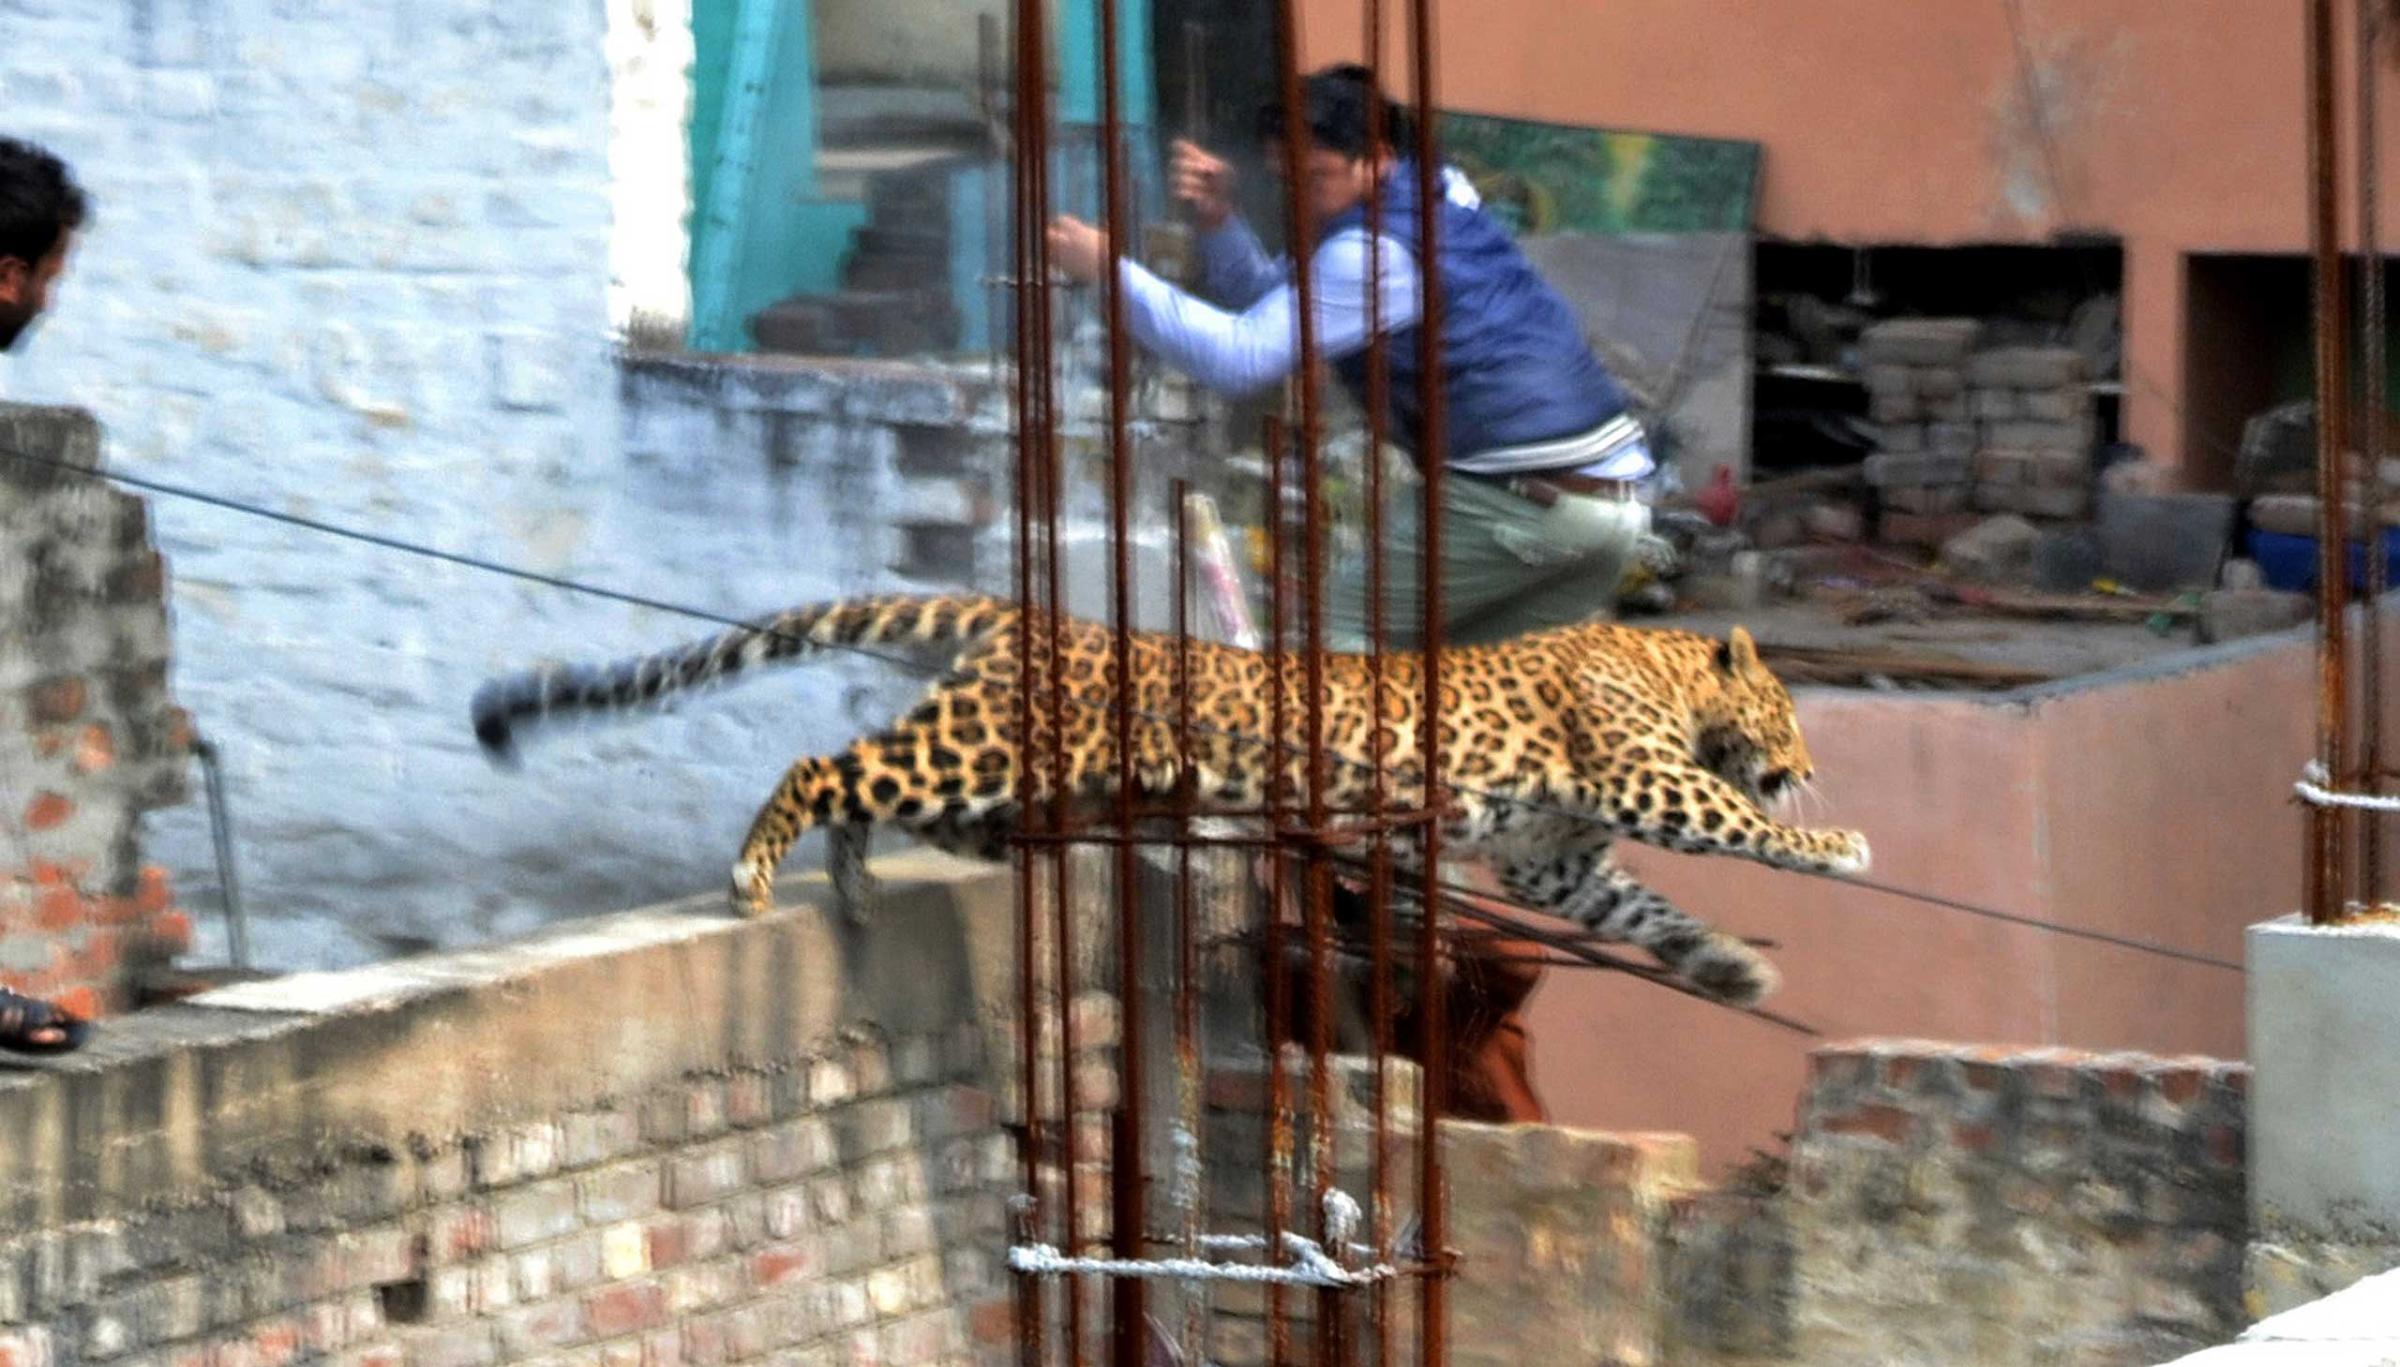 A leopard leaps across an under-construction structure near a furniture market in the Degumpur residential area as a bystander moves out of the way in Meerut, India, Feb. 23, 2014.